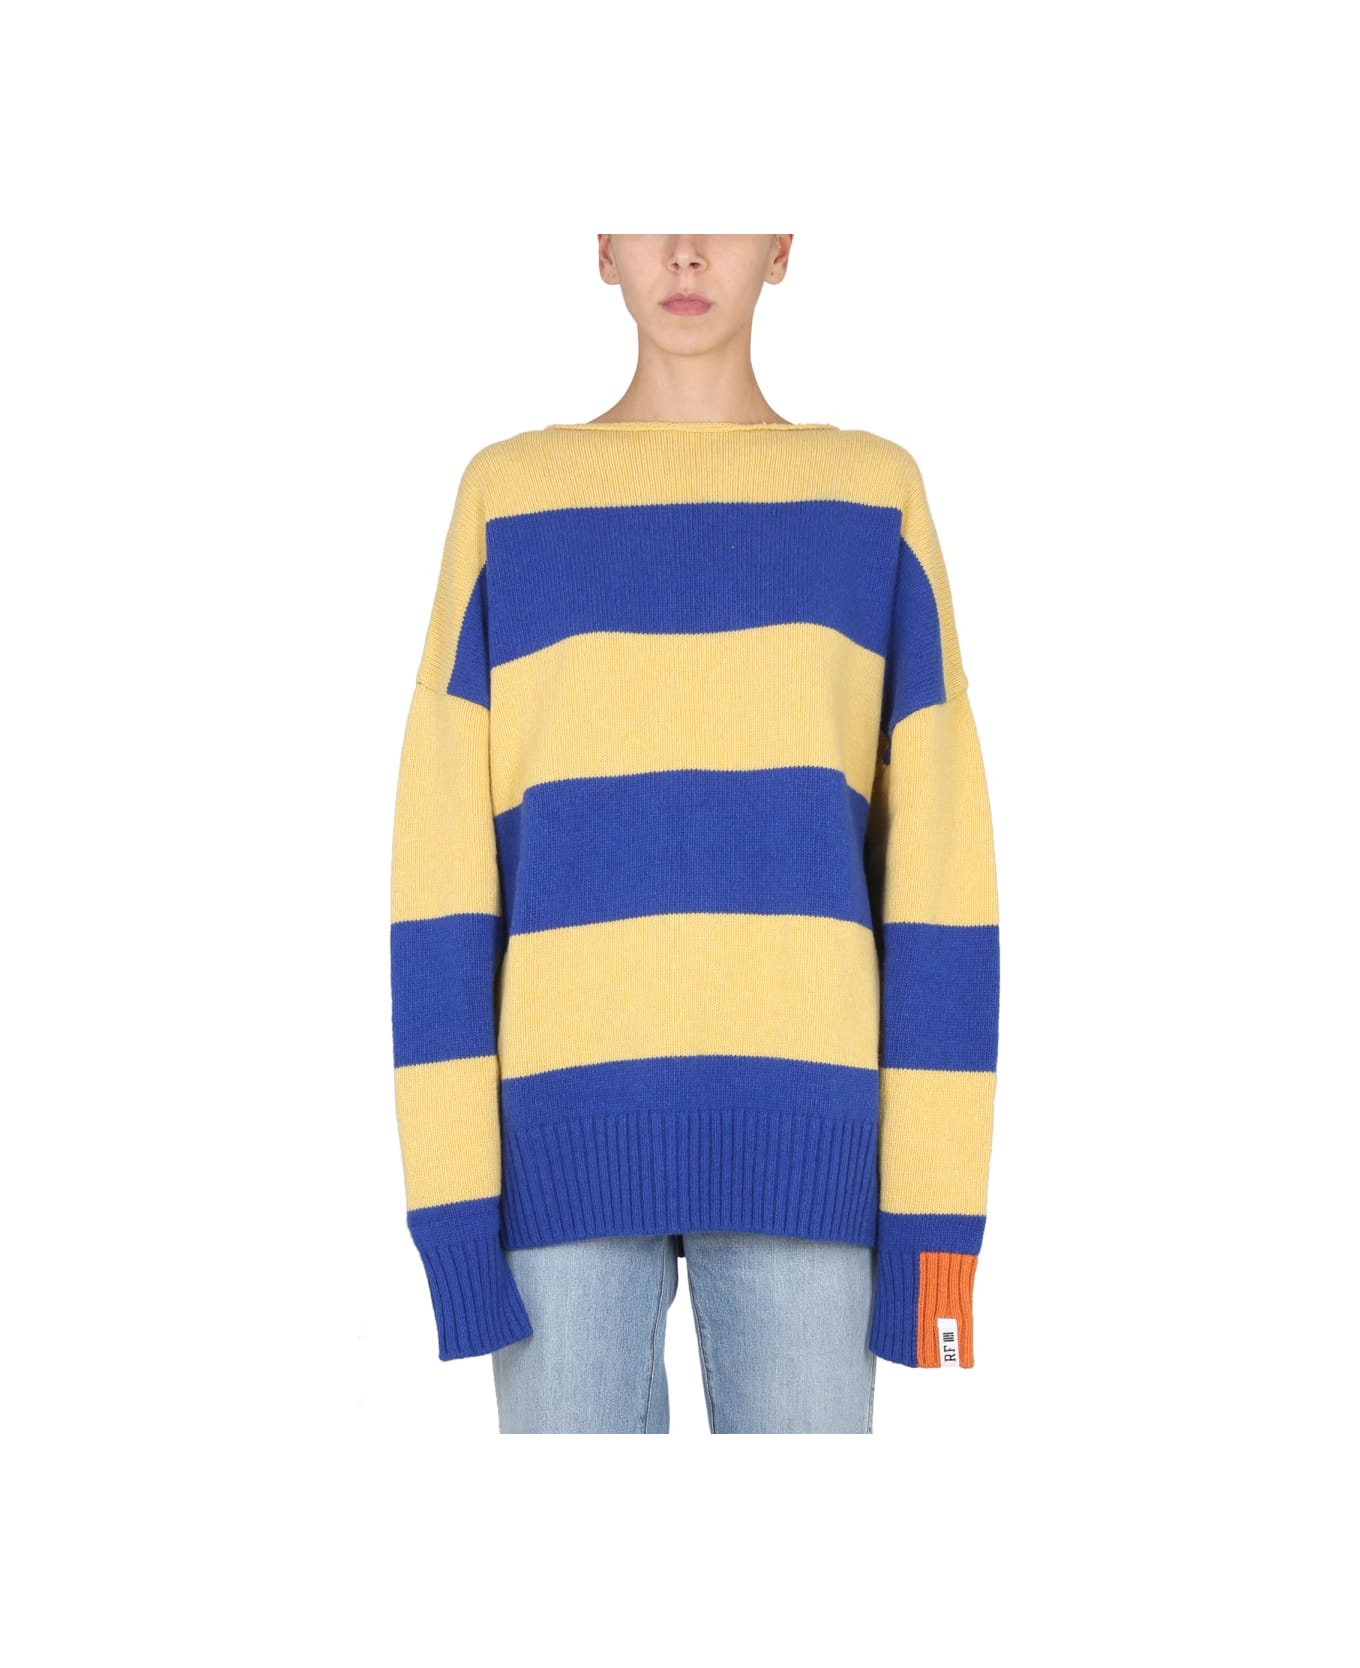 Right For Striped Shirt - YELLOW